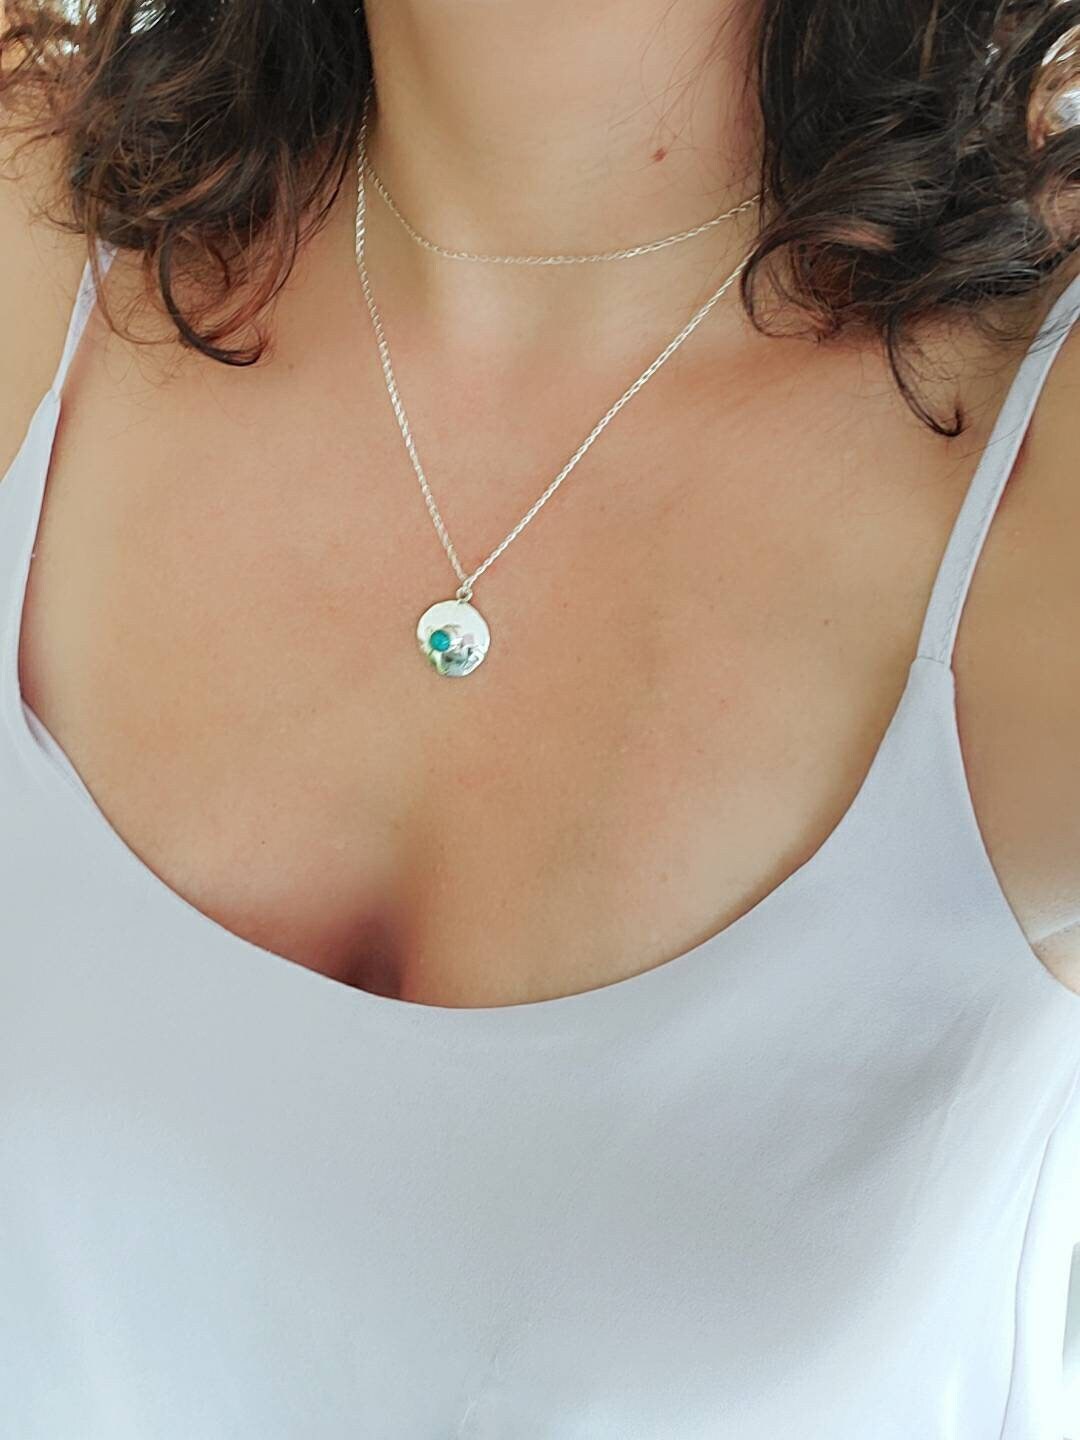 Hammered Turquoise Necklace, Sterling Silver Pendant with Chain, Turquoise Pendant, Natural Stones, Women Necklace, Gift for her-0